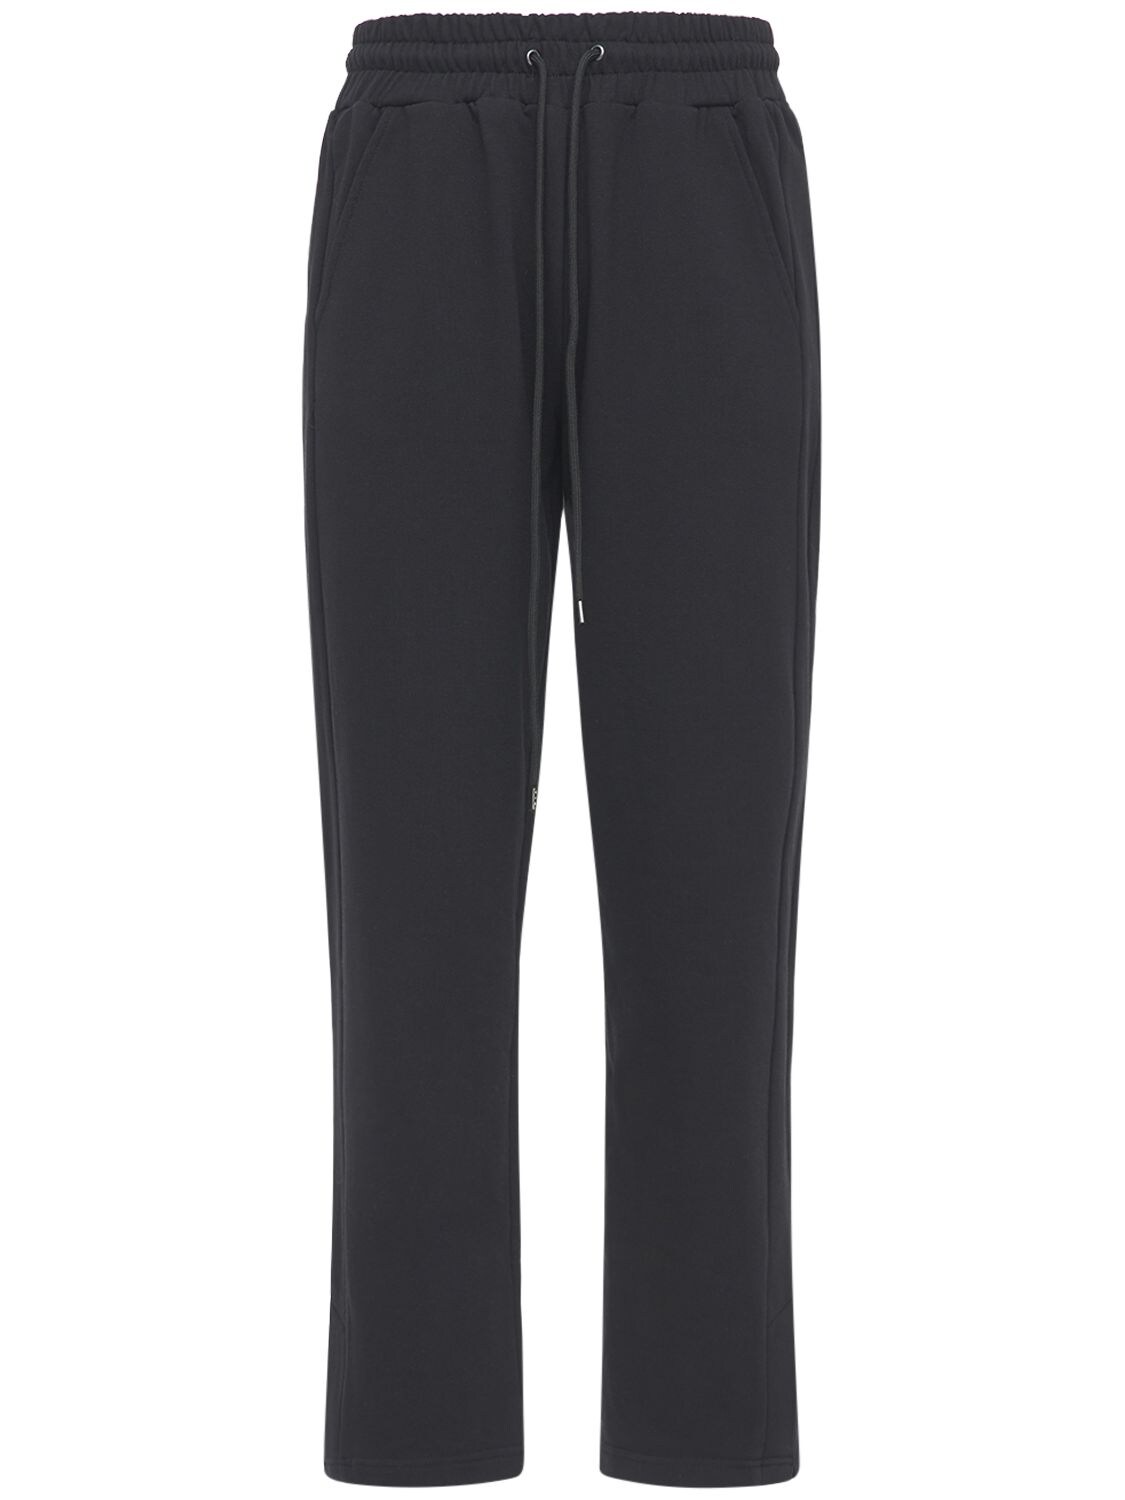 Ihs Flared Cotton Sweatpants W/ Side Slits In Black